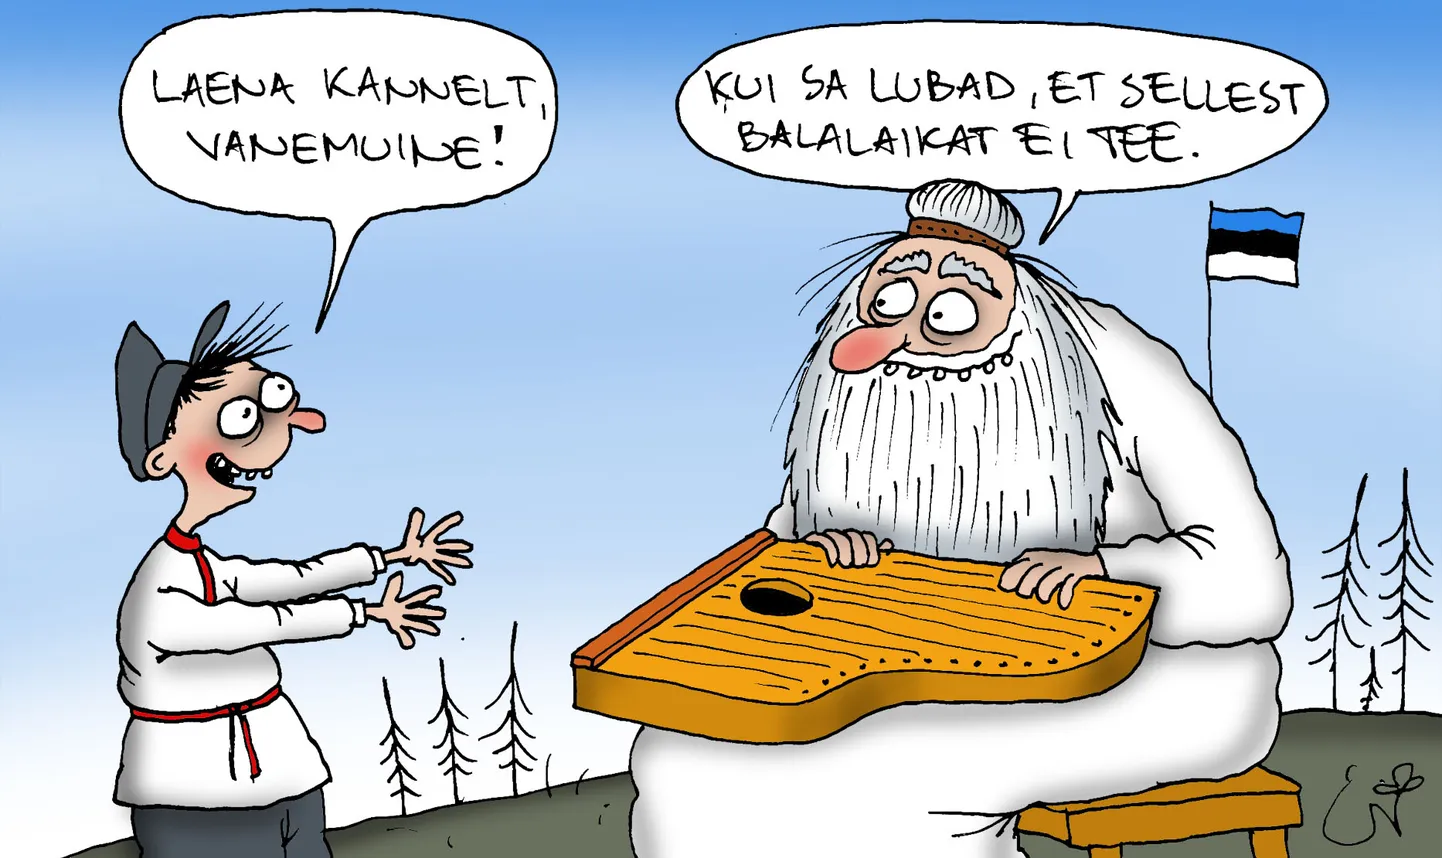 Young Russian: Please, borrow me the psaltery, Vanemuine! 
Vanemuine (mythological Estonian figures): Only if you will promise that you don't make it a balalaika.